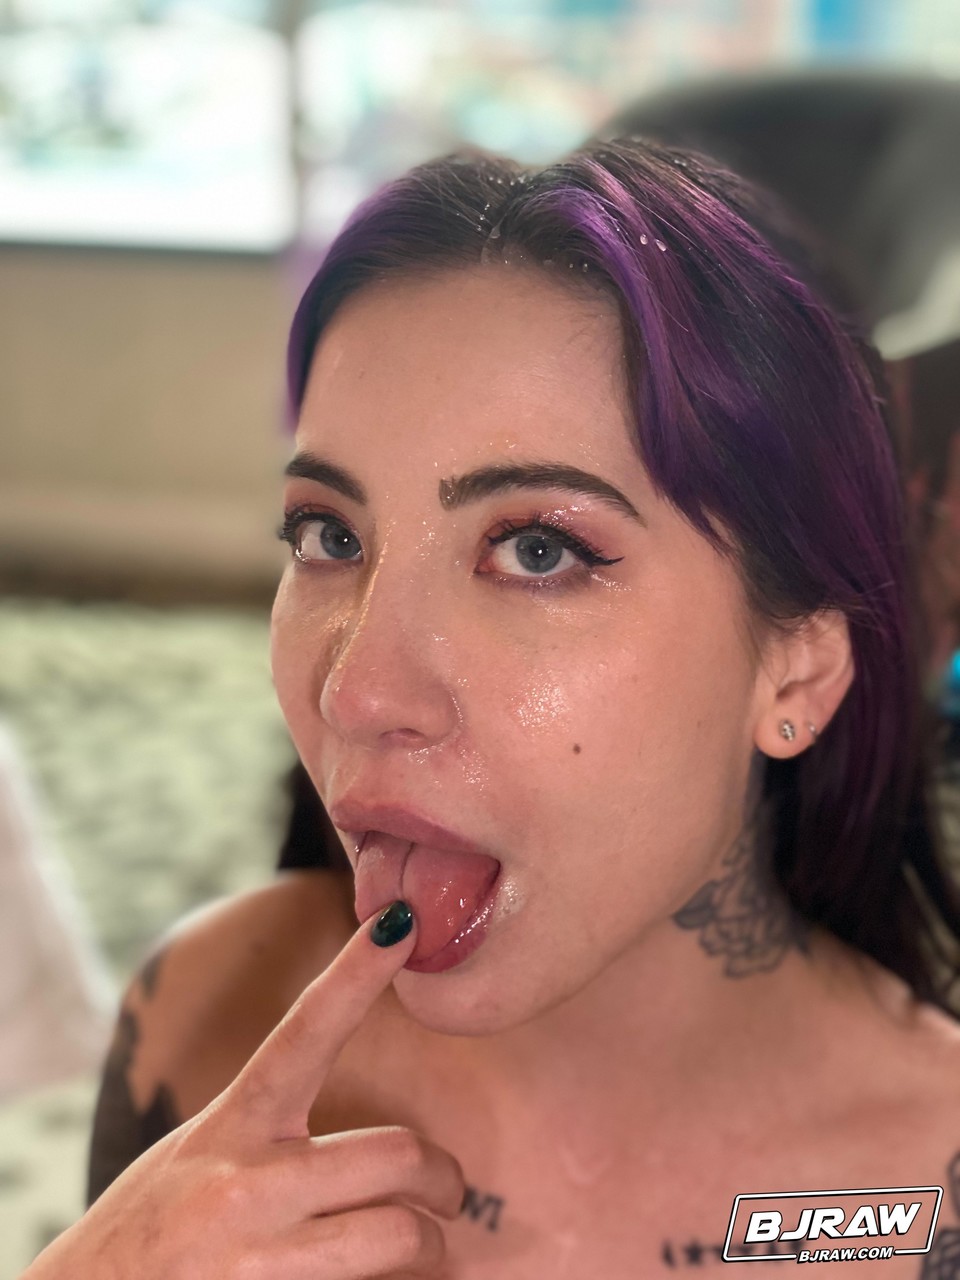 Brunette babe with tattoos Charlotte Sartre takes a dick in her mouth photo porno #424561435 | BJ Raw Pics, Charlotte Sartre, Tattoo, porno mobile